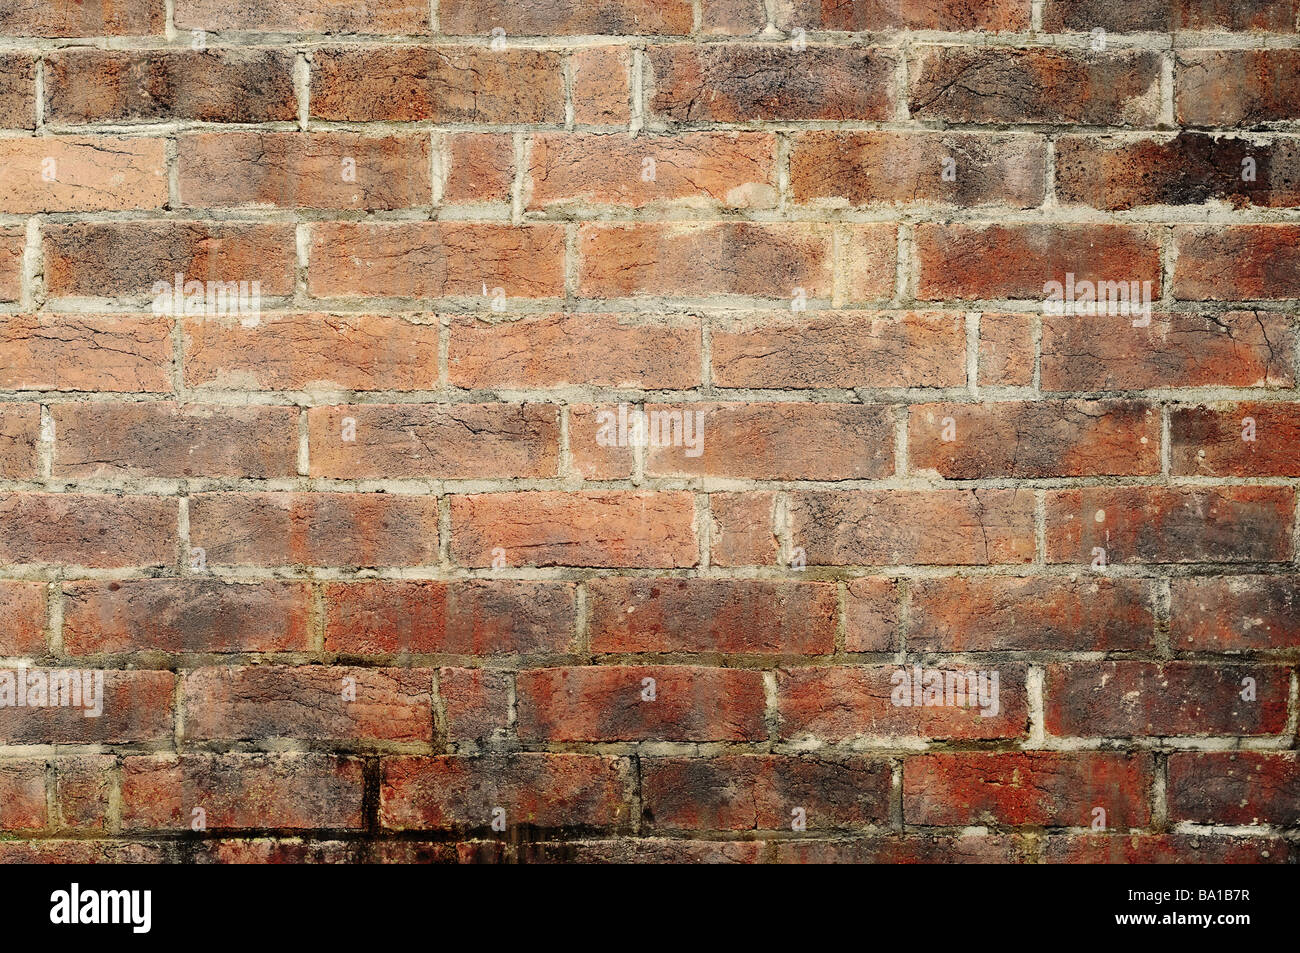 great image of an old and grungy brick wall Stock Photo